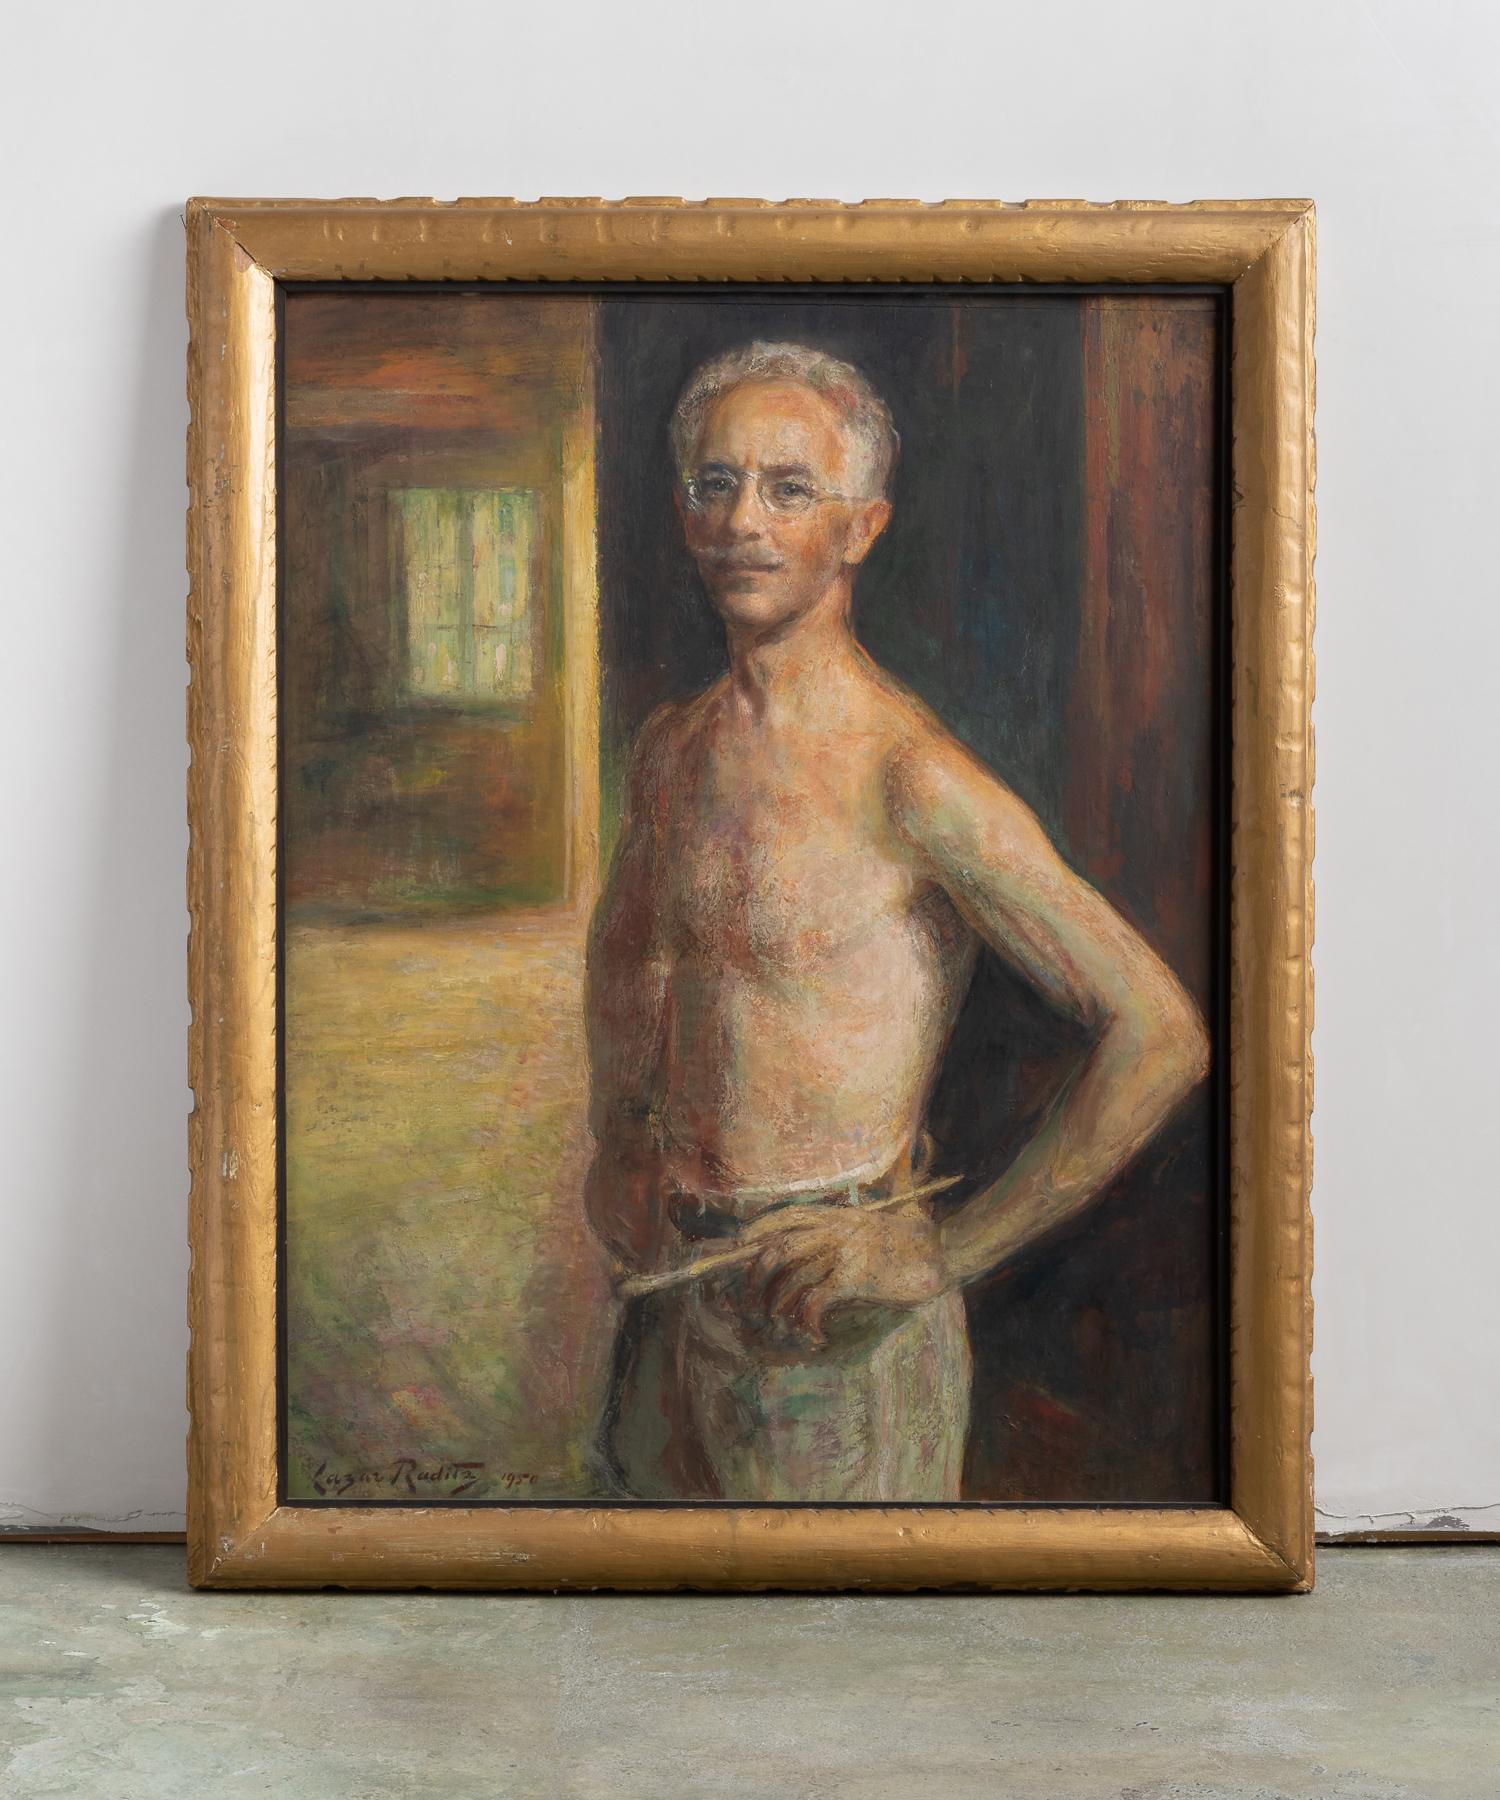 Self portrait by Lazar Raditz, circa 1950.

Includes original frame. Ladar Raditz (1887 - 1956) was known as the foremost portrait painter in Philadelphia with clients including the Rockefellar and Dupont families.

This piece ships from